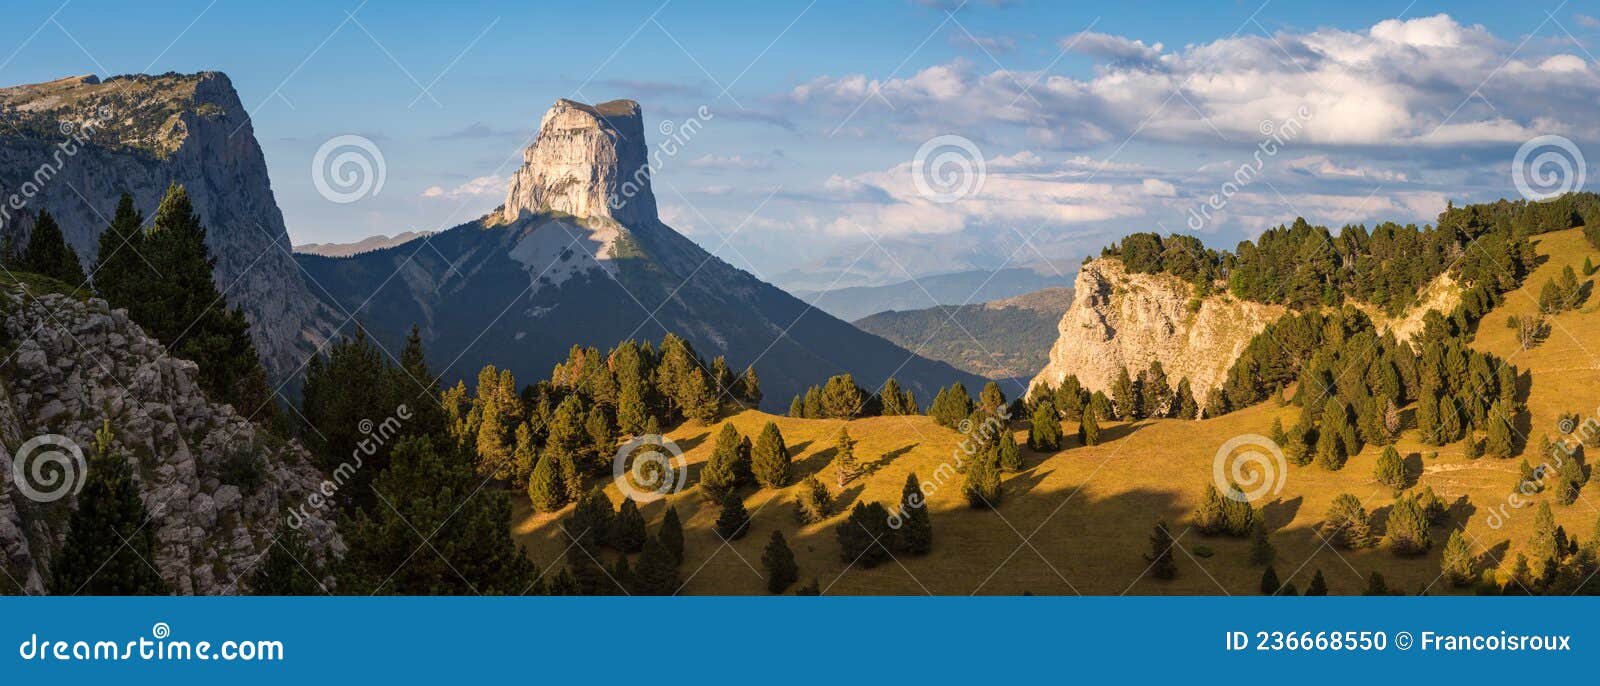 mont aiguille and the vercors high plateaus in autumn. vercors regional natural park, alps, france